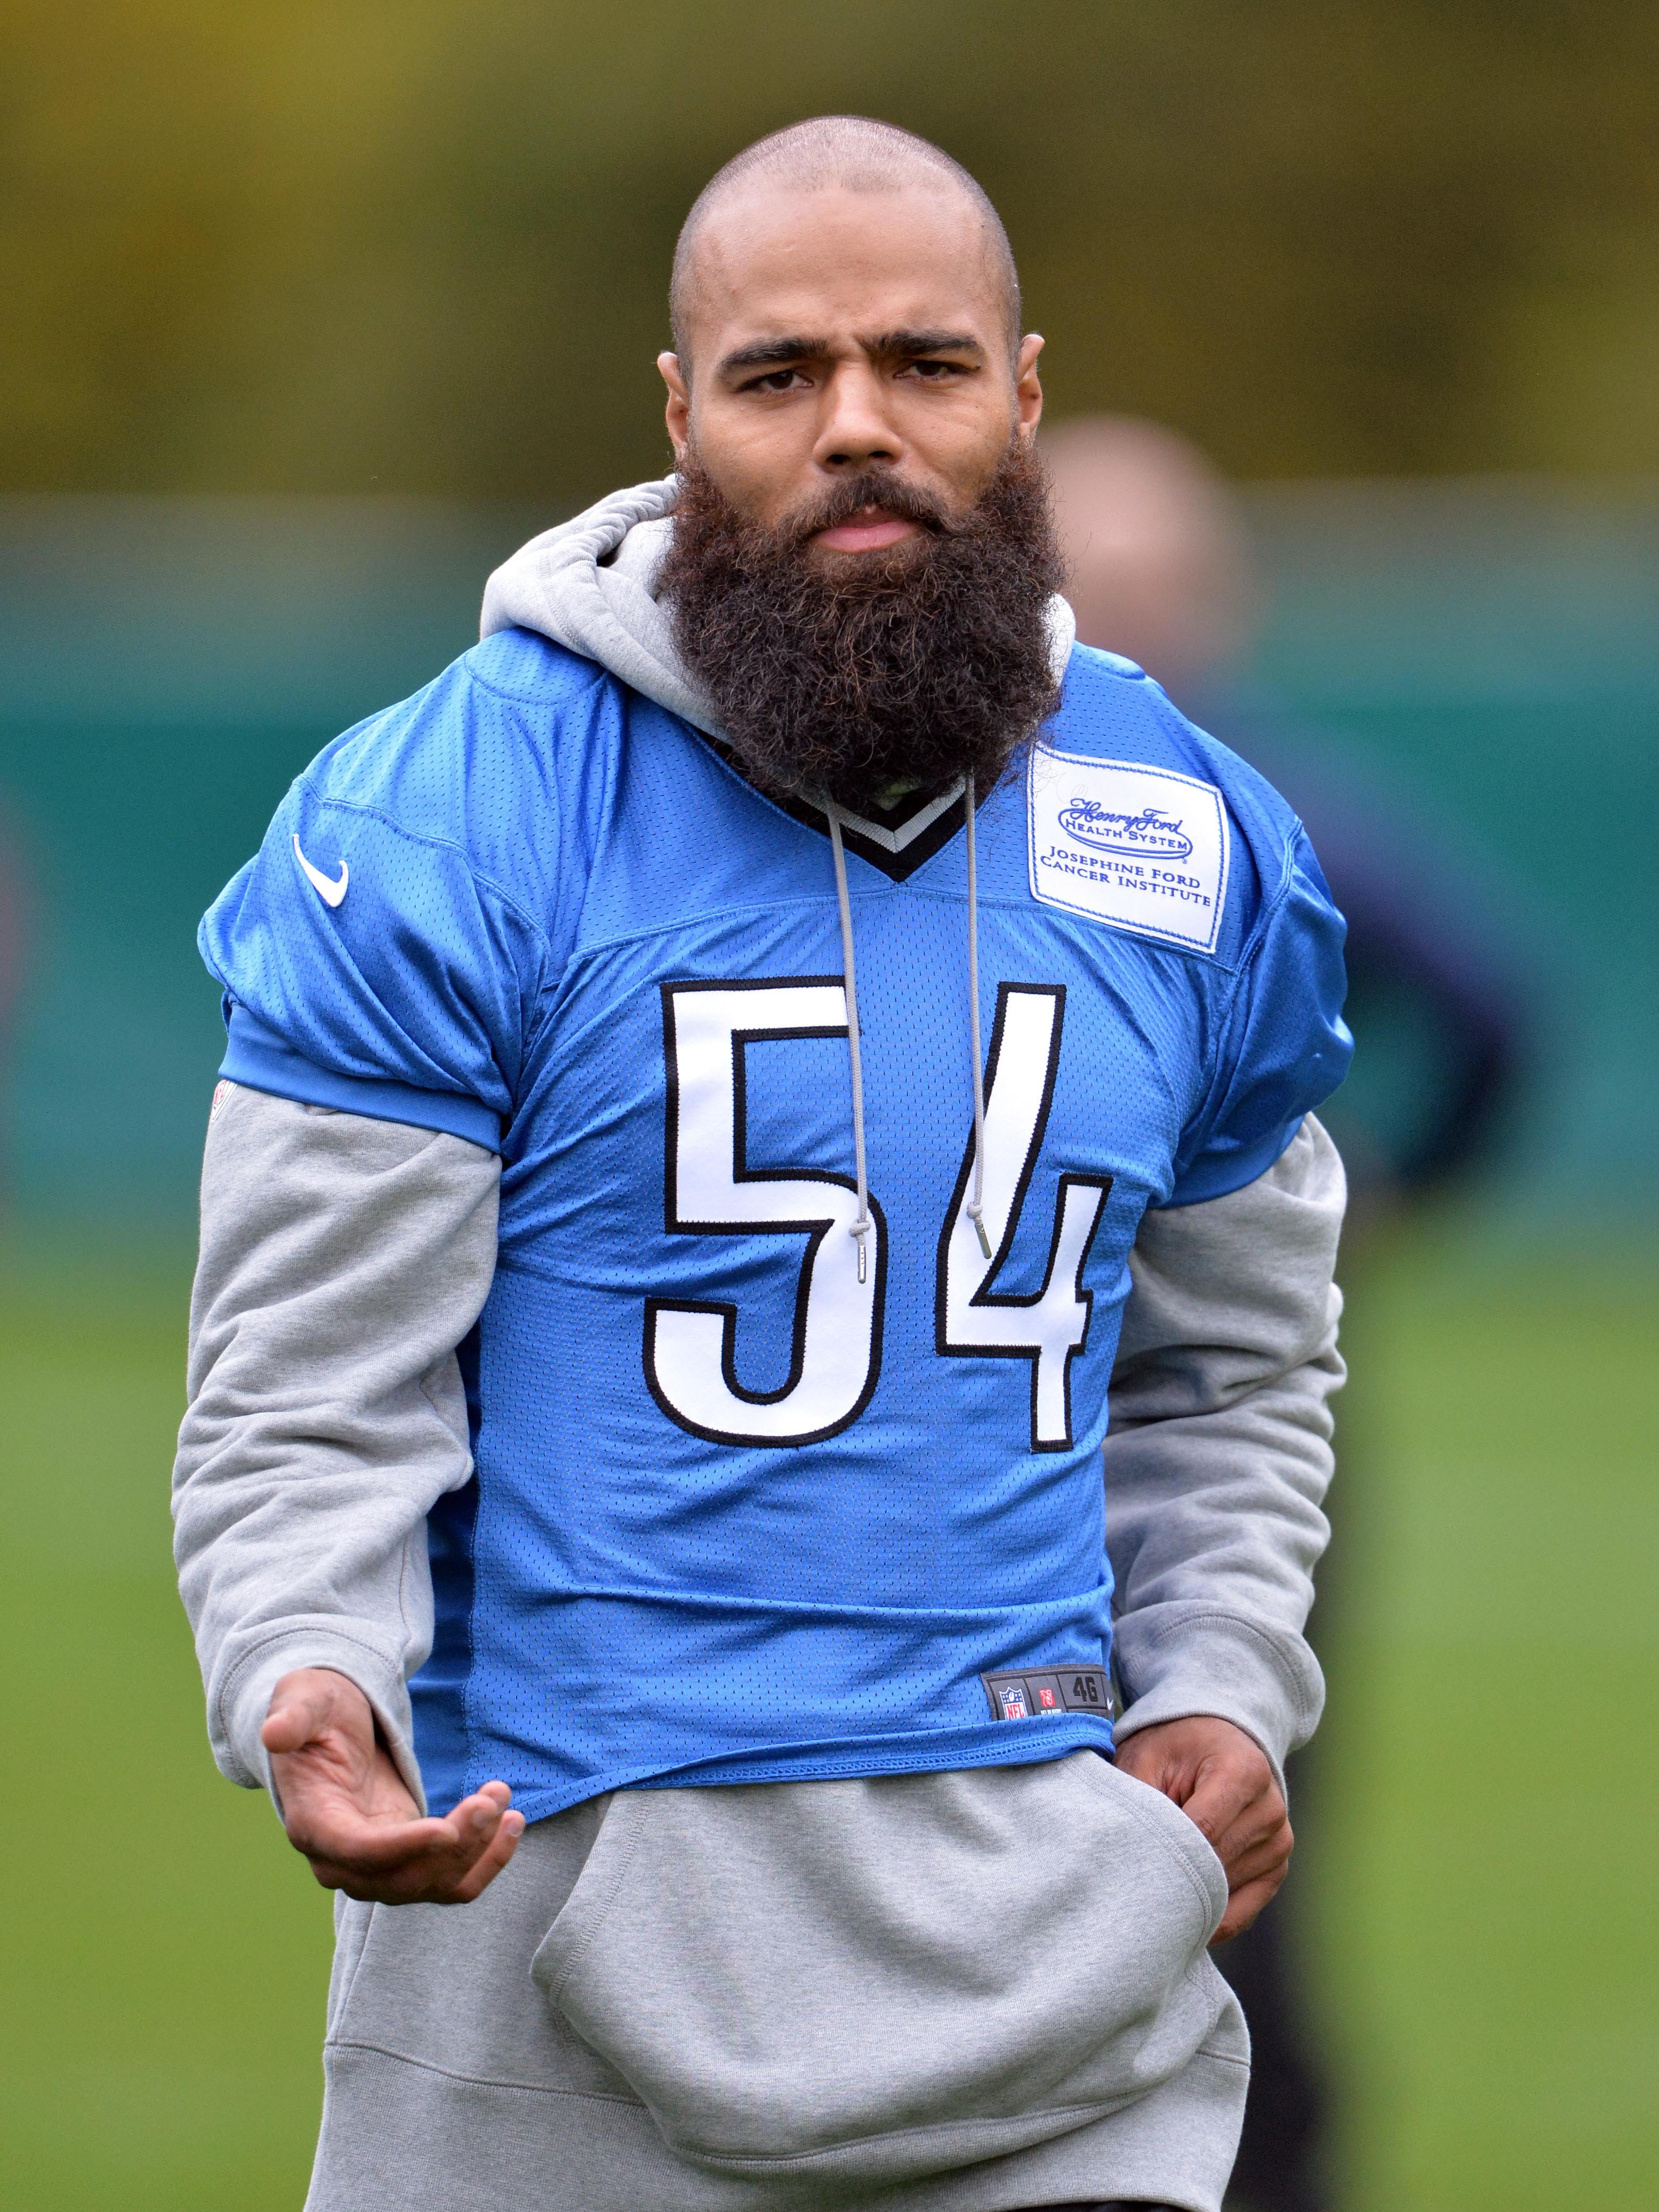 Lions' best players: No. 3 DeAndre Levy capable of Pro Bowl year